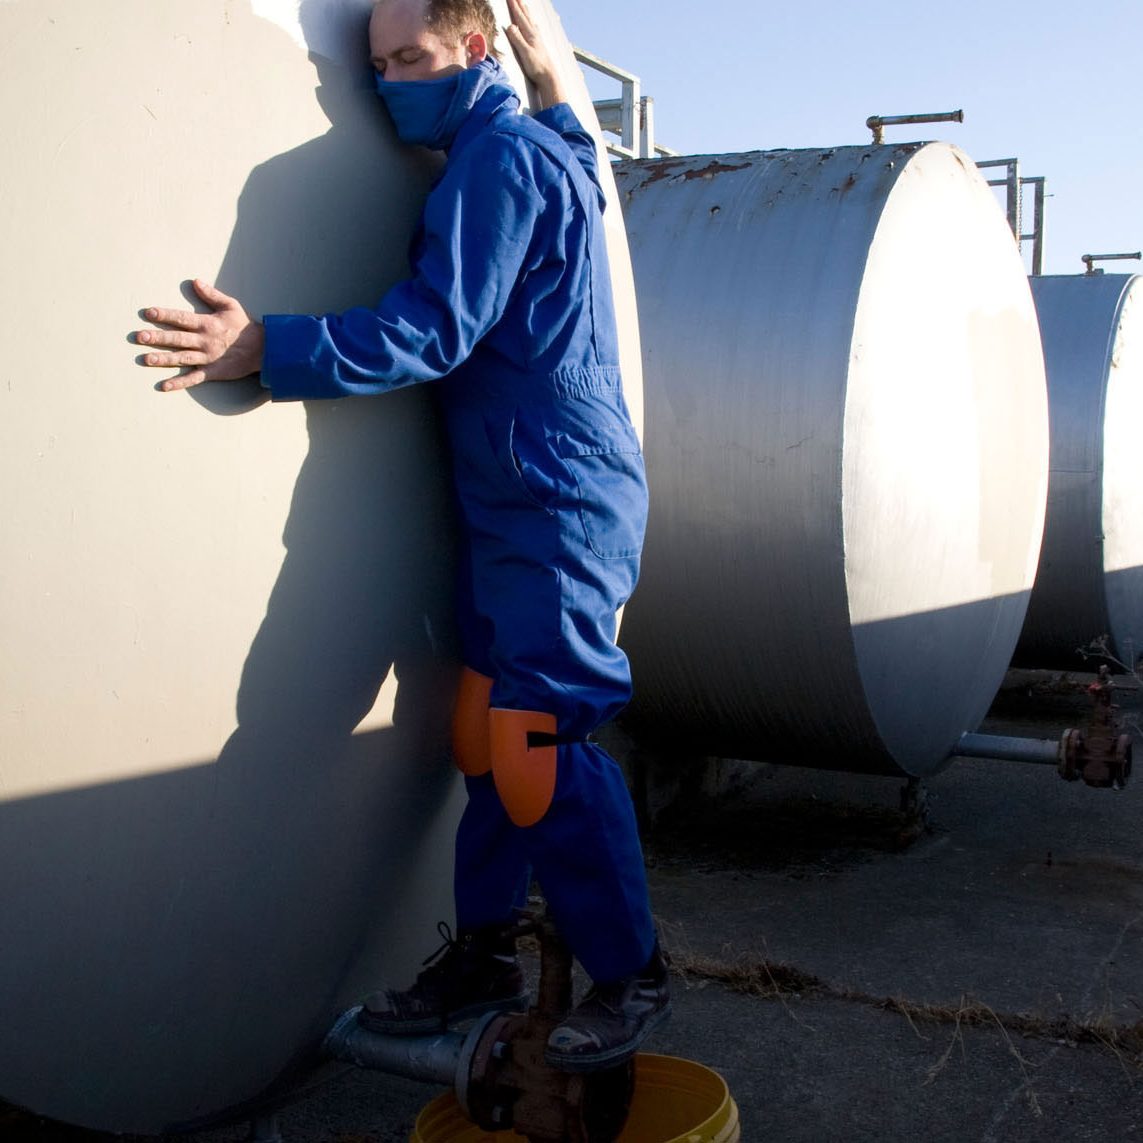 A man in a blue jumpsuit with kneepads scaling industrial tanks.